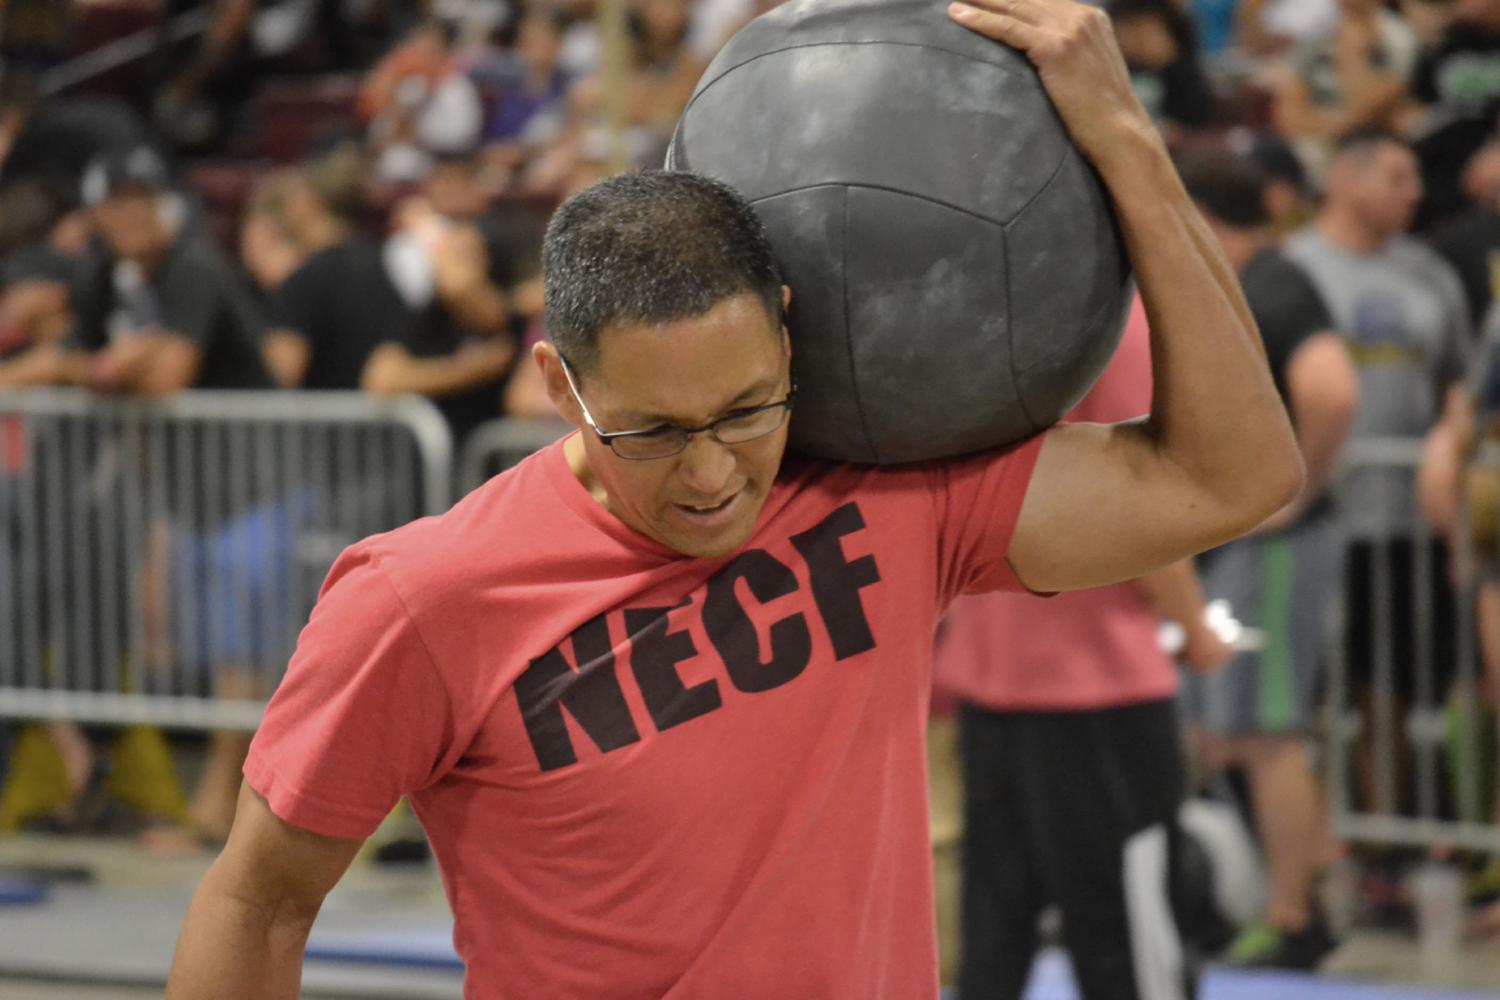 FCC instructor Larry Honda competes in a CrossFit Competition. Image courtesy of Larry Honda